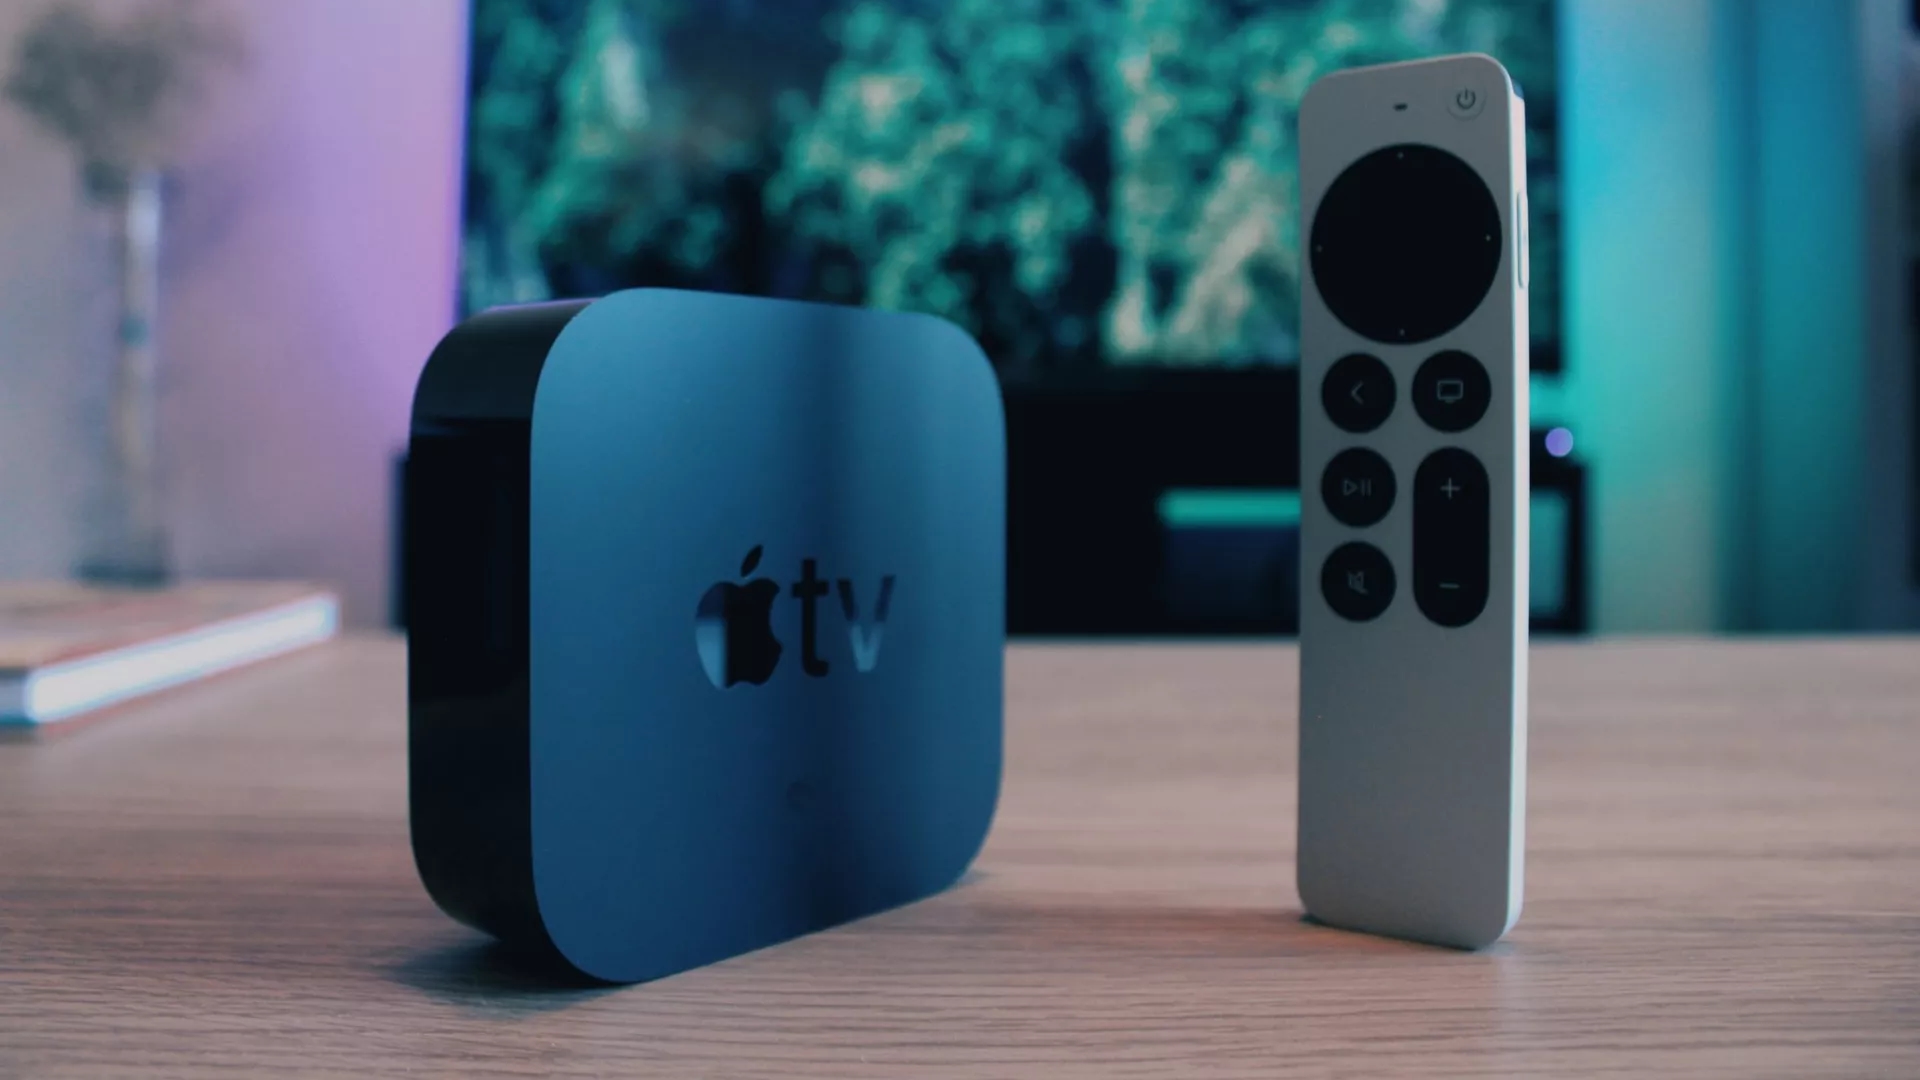 Apple TV 4K and Siri Remote in front of a TV